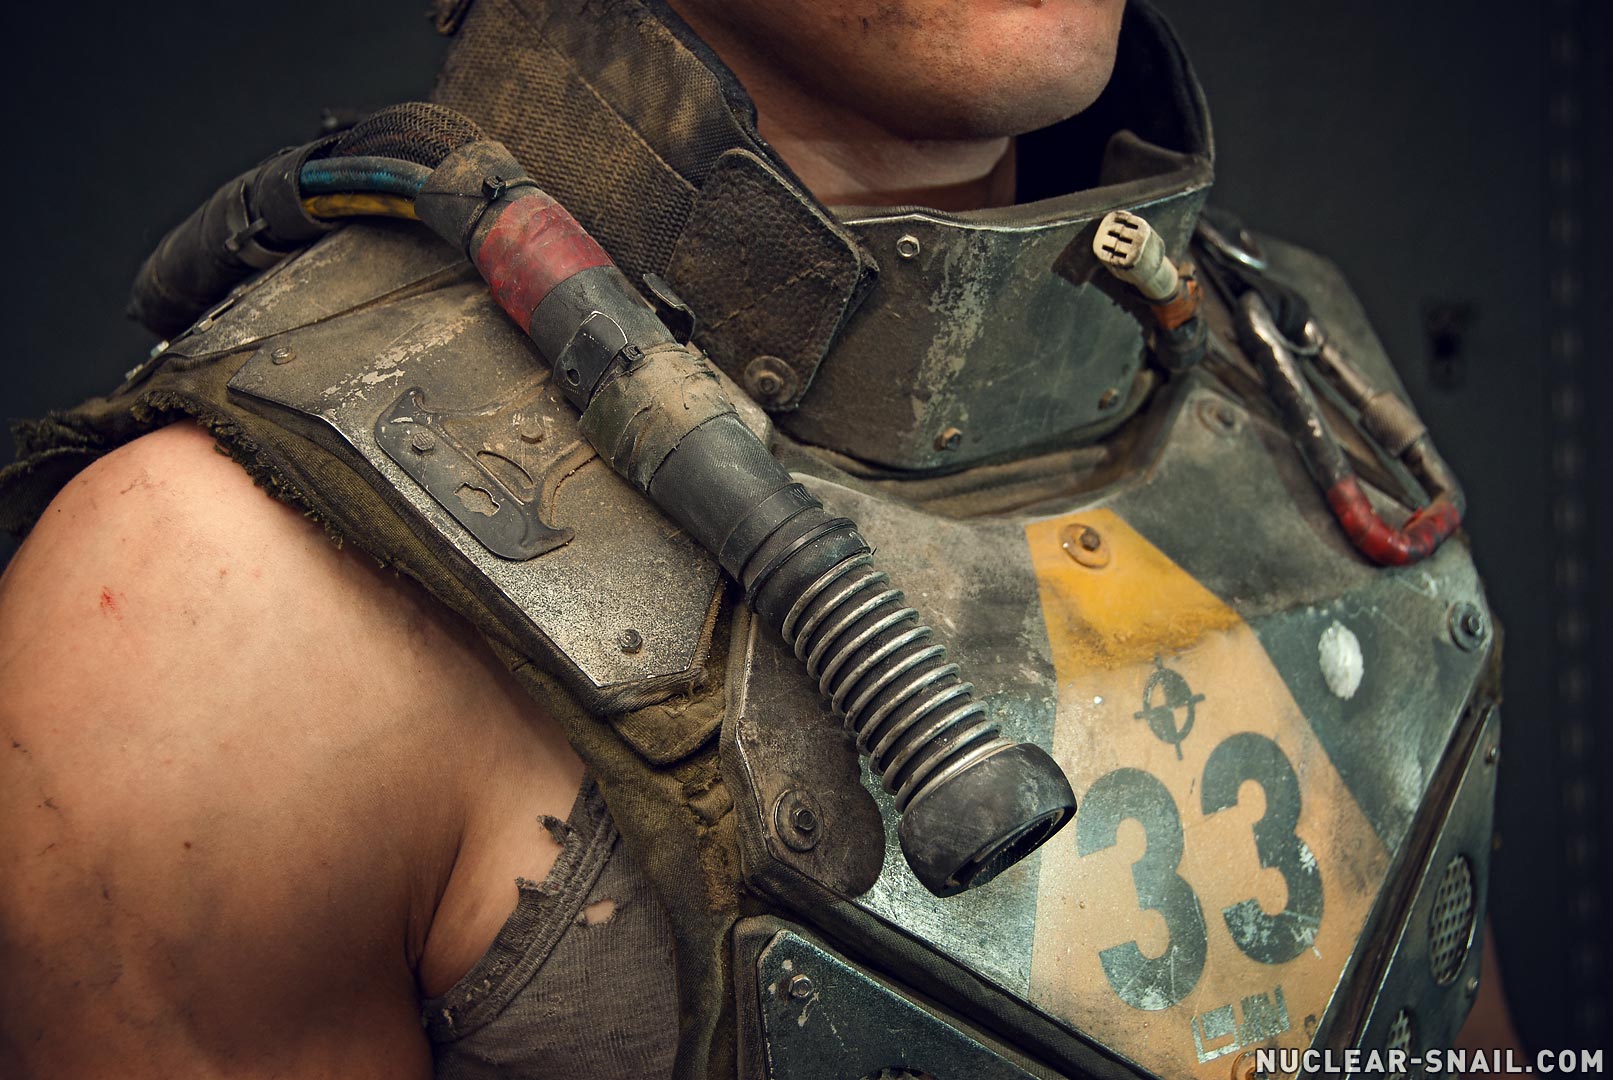 Post-Apocalyptic Cosplay Looks Like It Survived The End Of The World